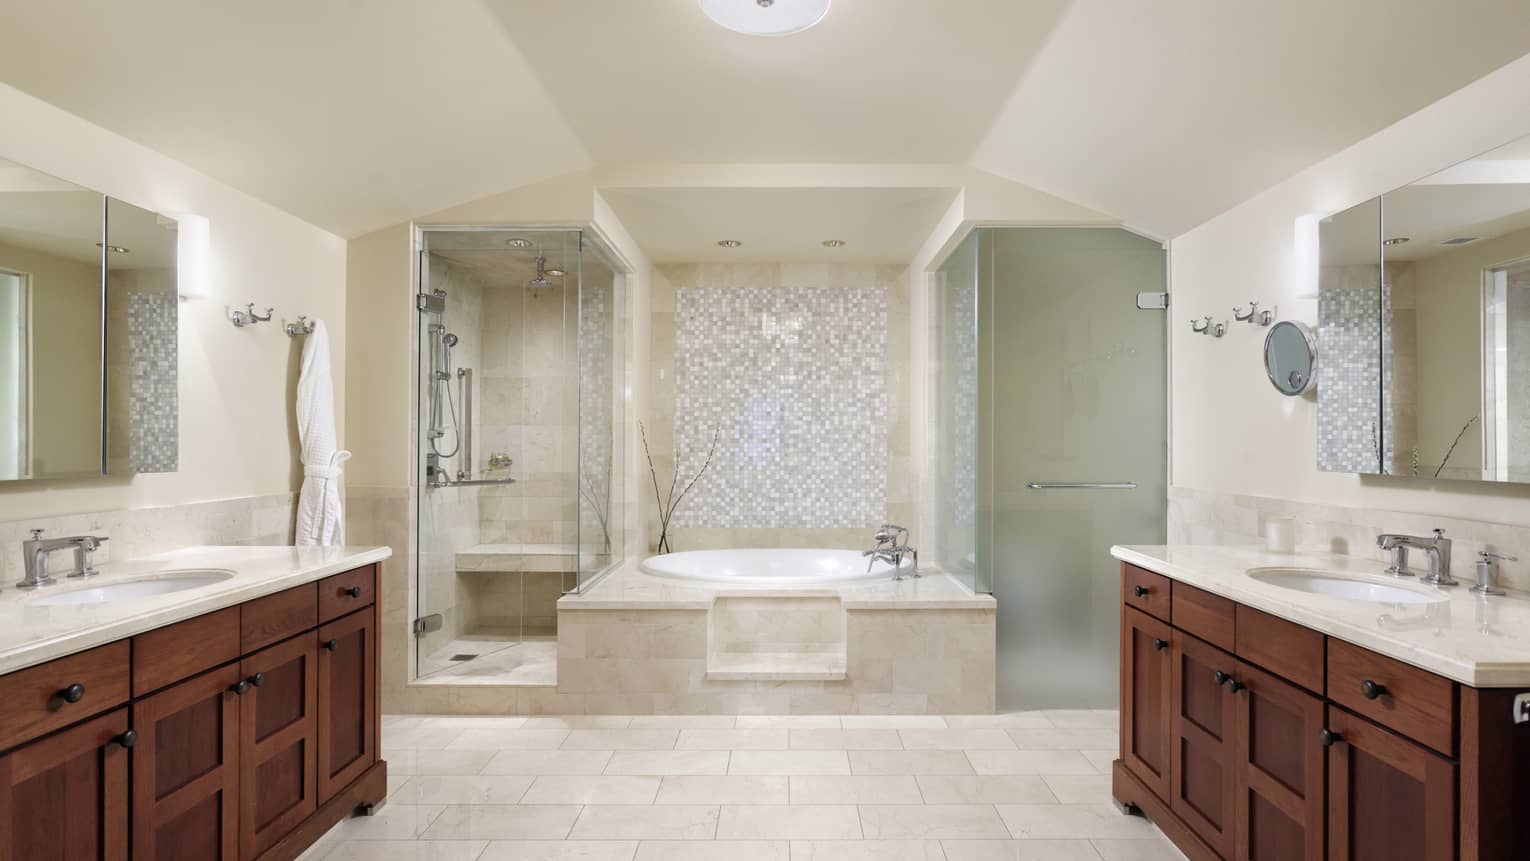 Large bathroom with tub in center, showers on either side, long vanities on either side